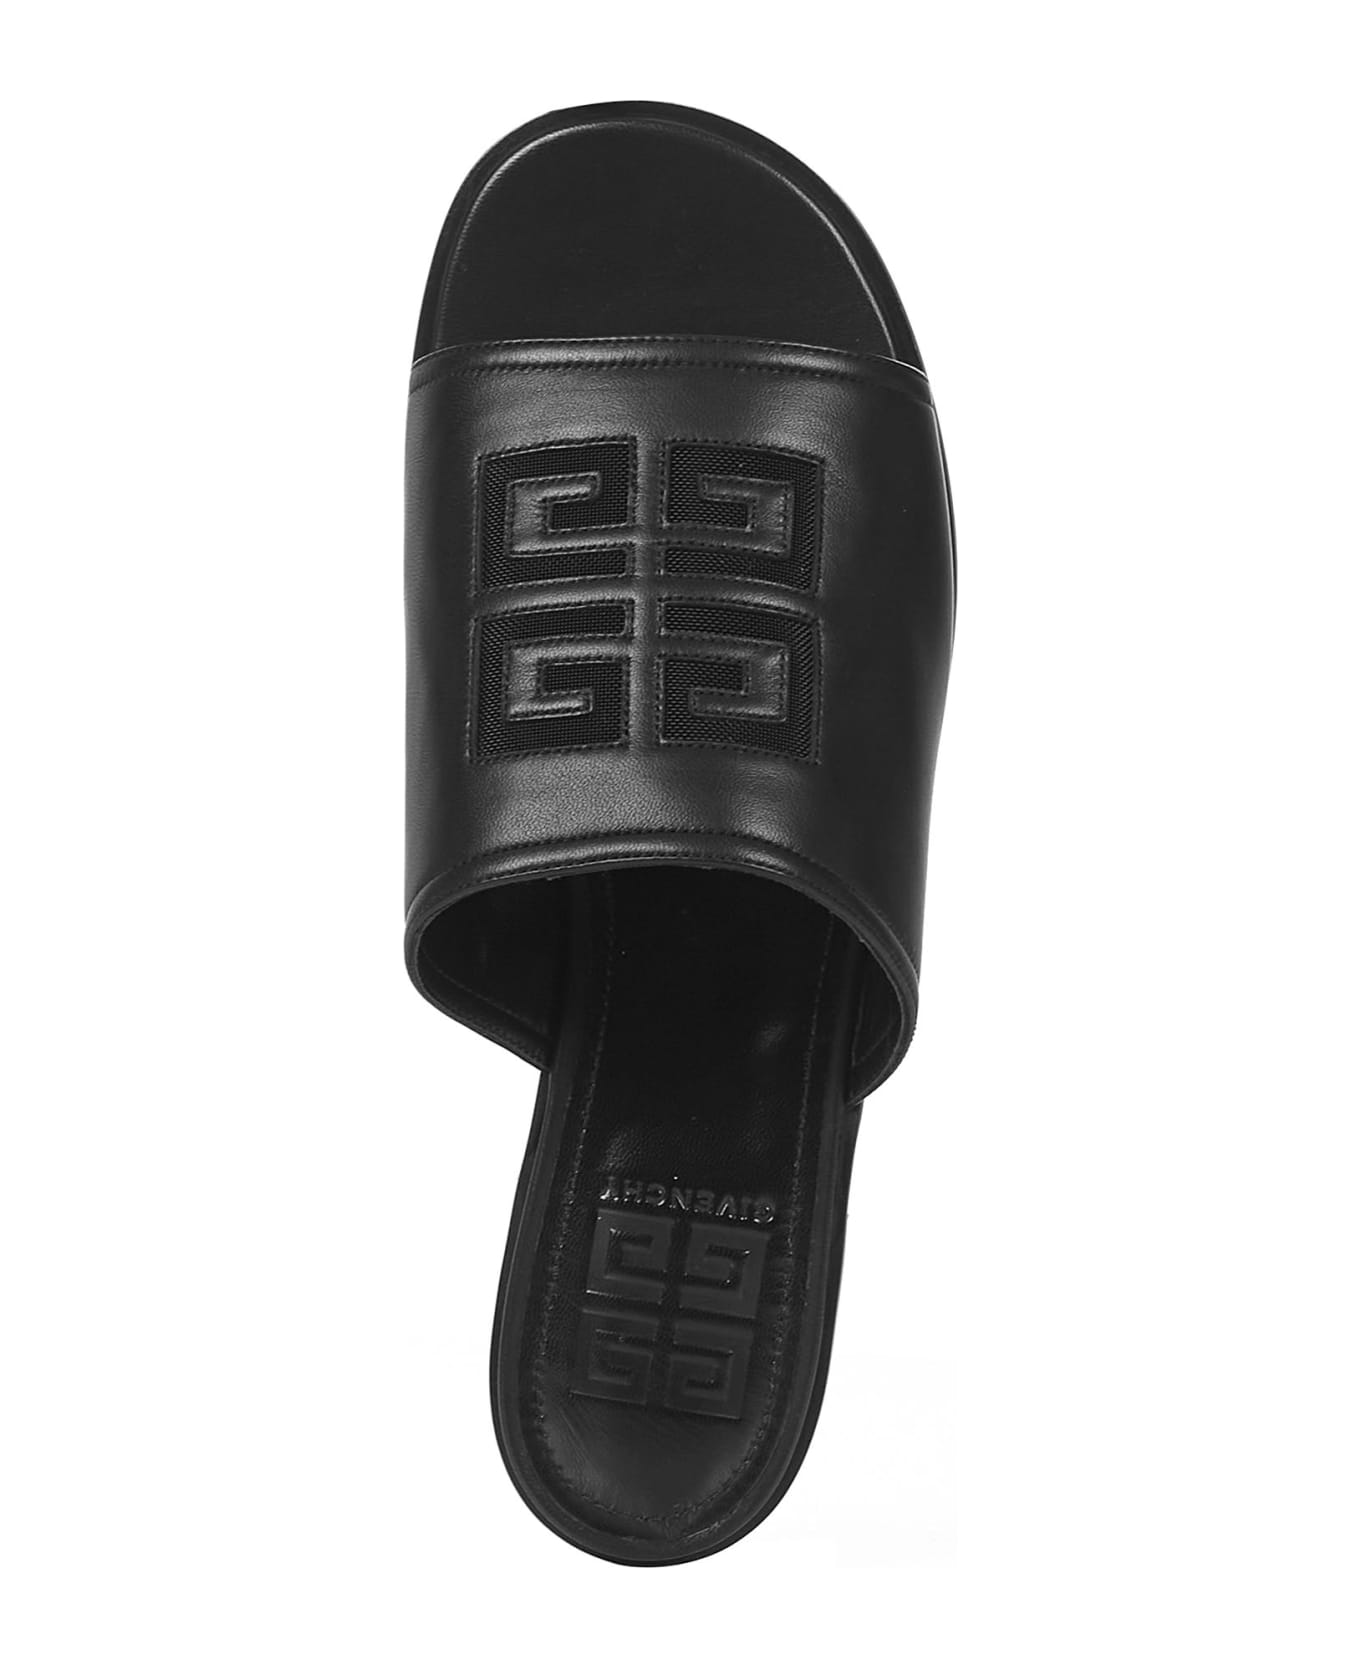 Givenchy Nappa Leather 4g Slippers - Black